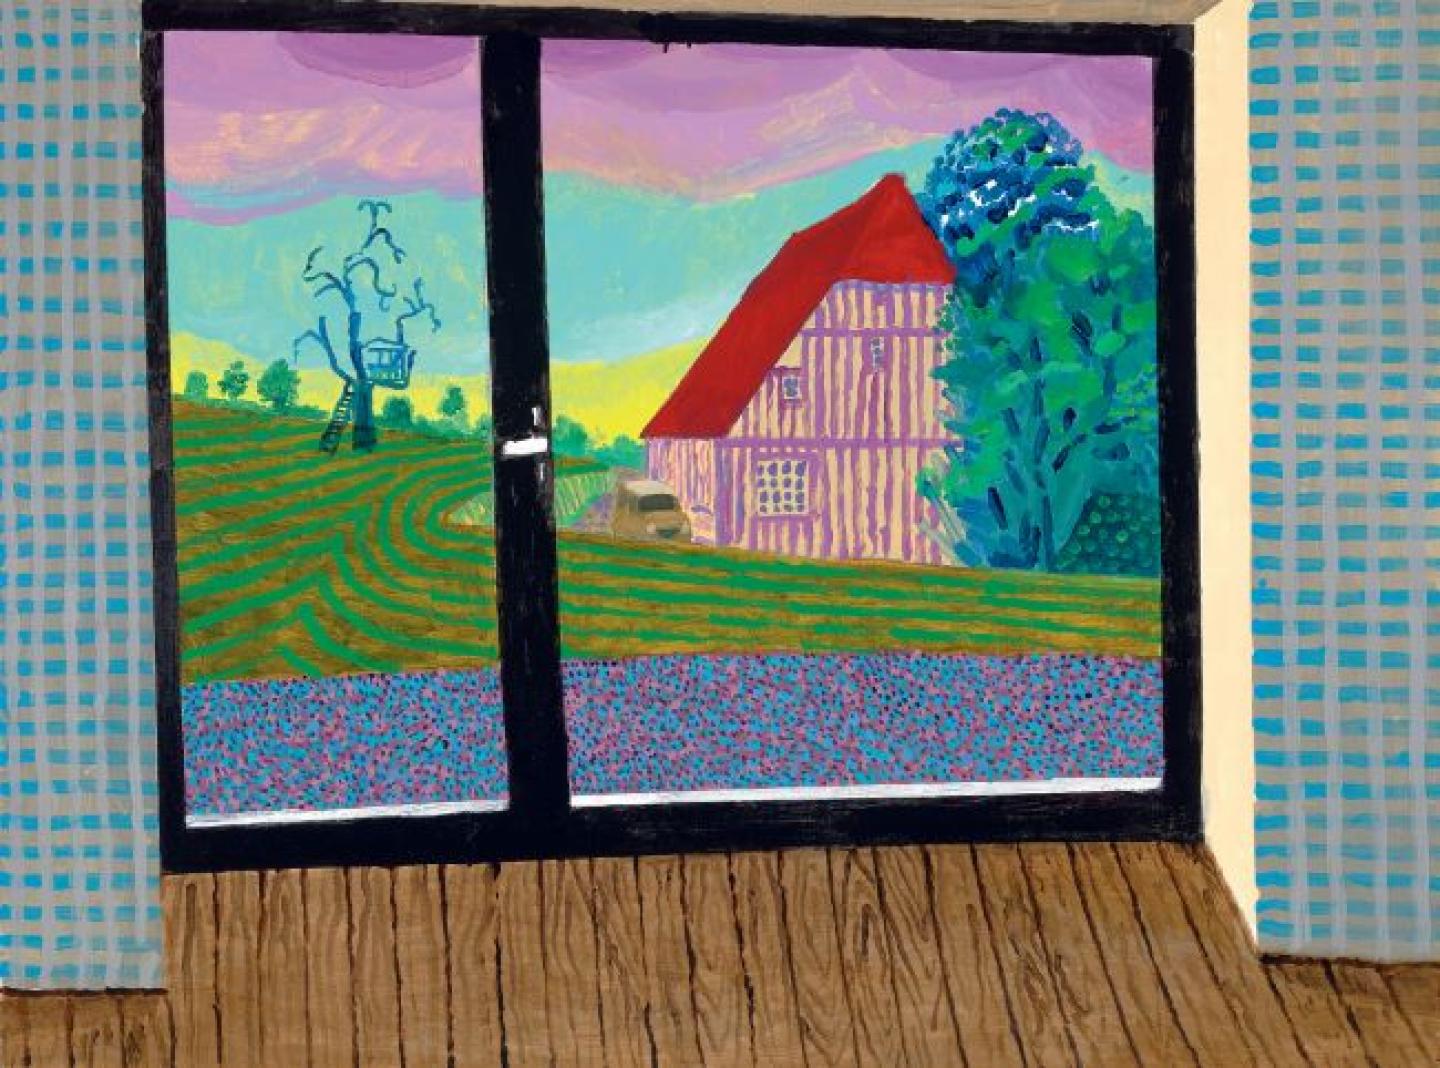 View From The Studio At Dawn II,  David Hockney, Acrylique sur toile, 201991 x 122 cm,  ©Galerie Lelong & Co